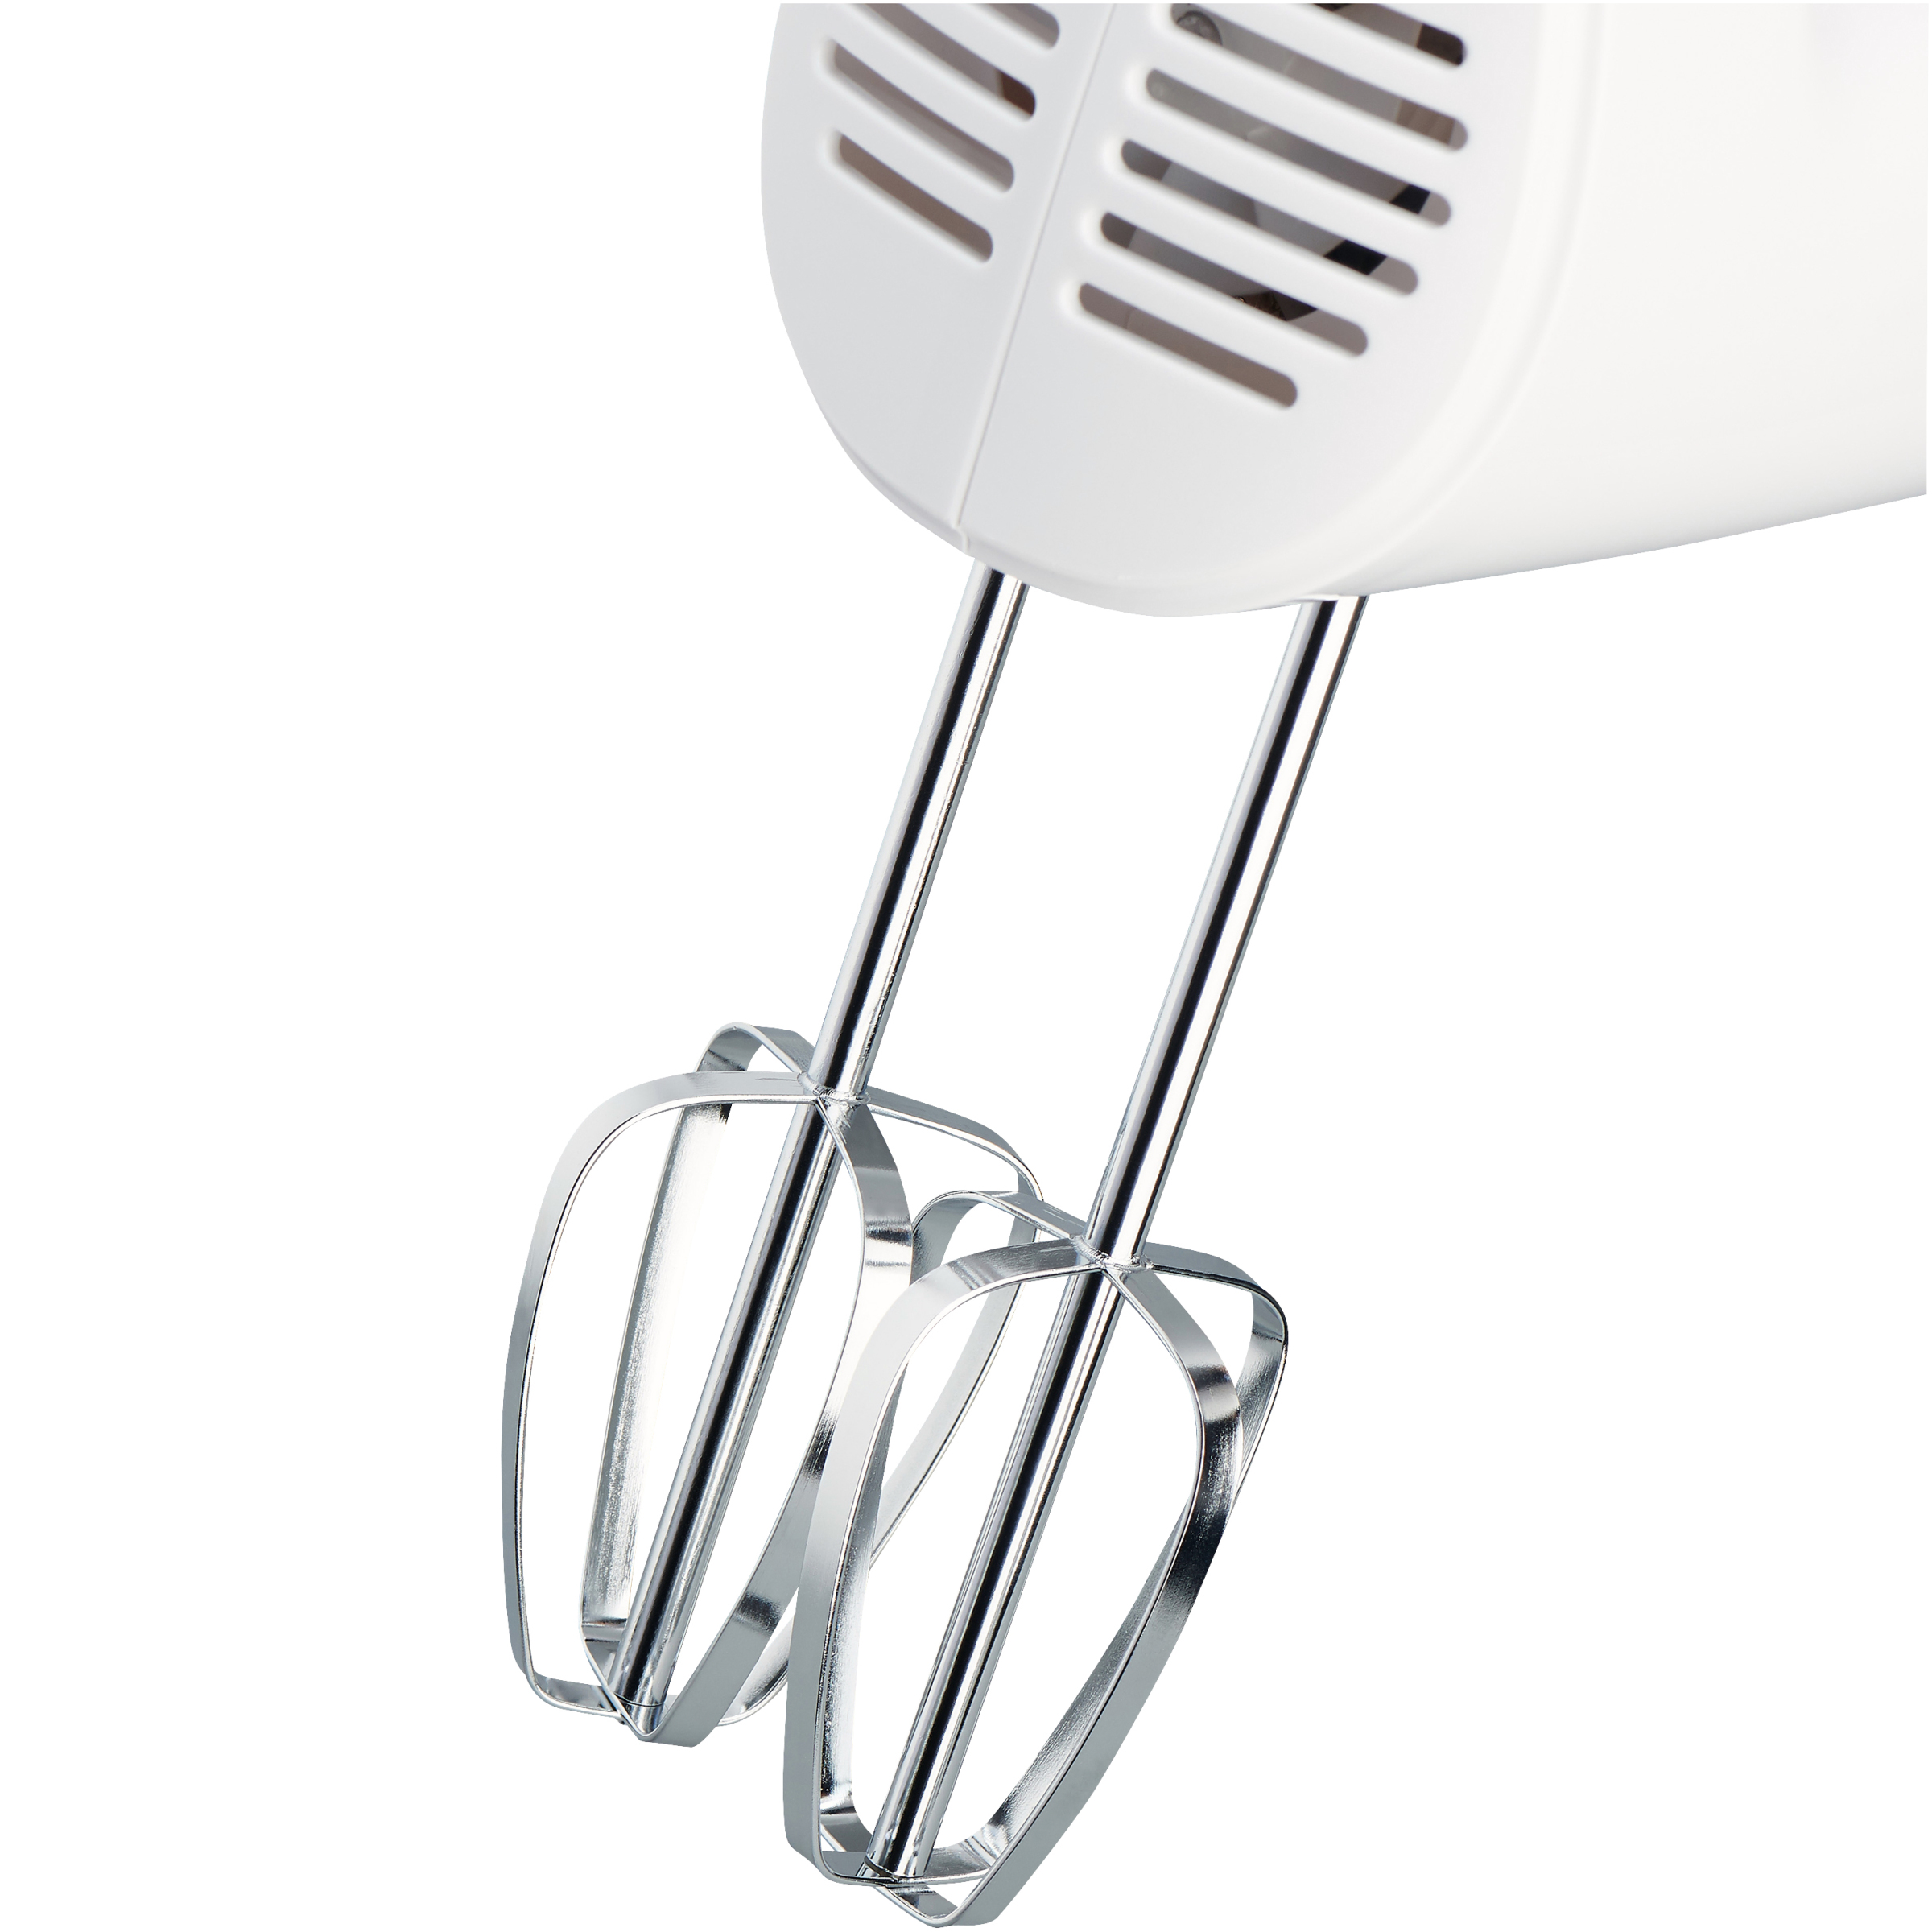 Mainstays 5-Speed 150-Watts Hand Mixer with Chrome Beaters, White - image 4 of 5